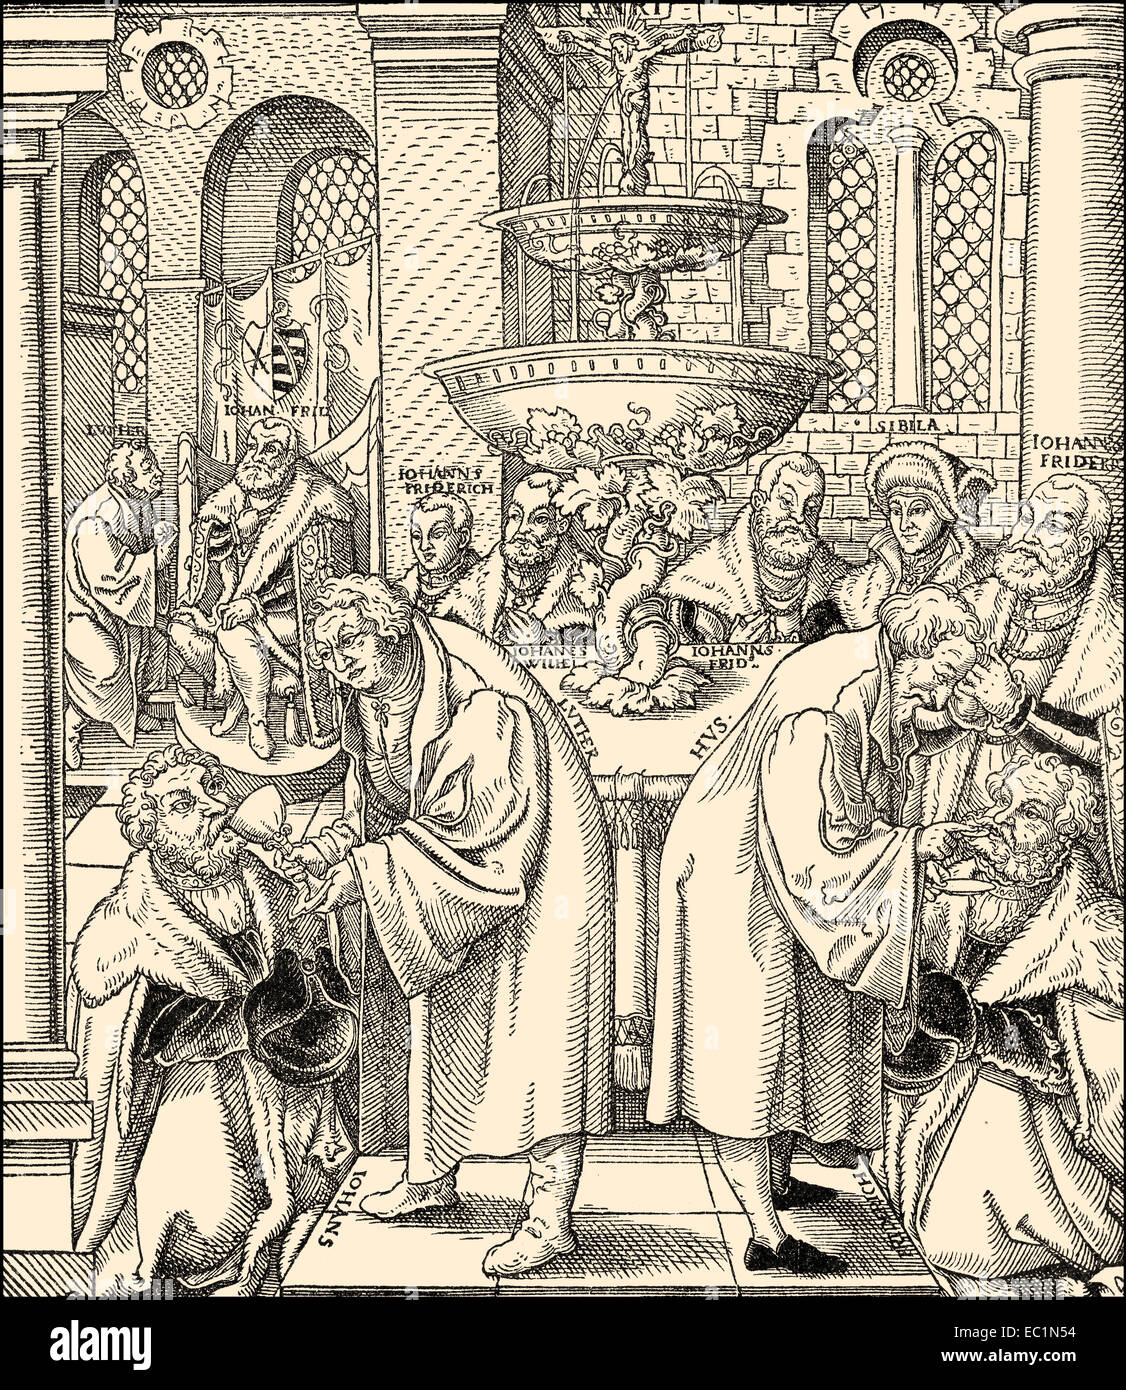 Martin Luther and Jan Hus or Johannes Huss giving the Eucharist, 15th century, Stock Photo